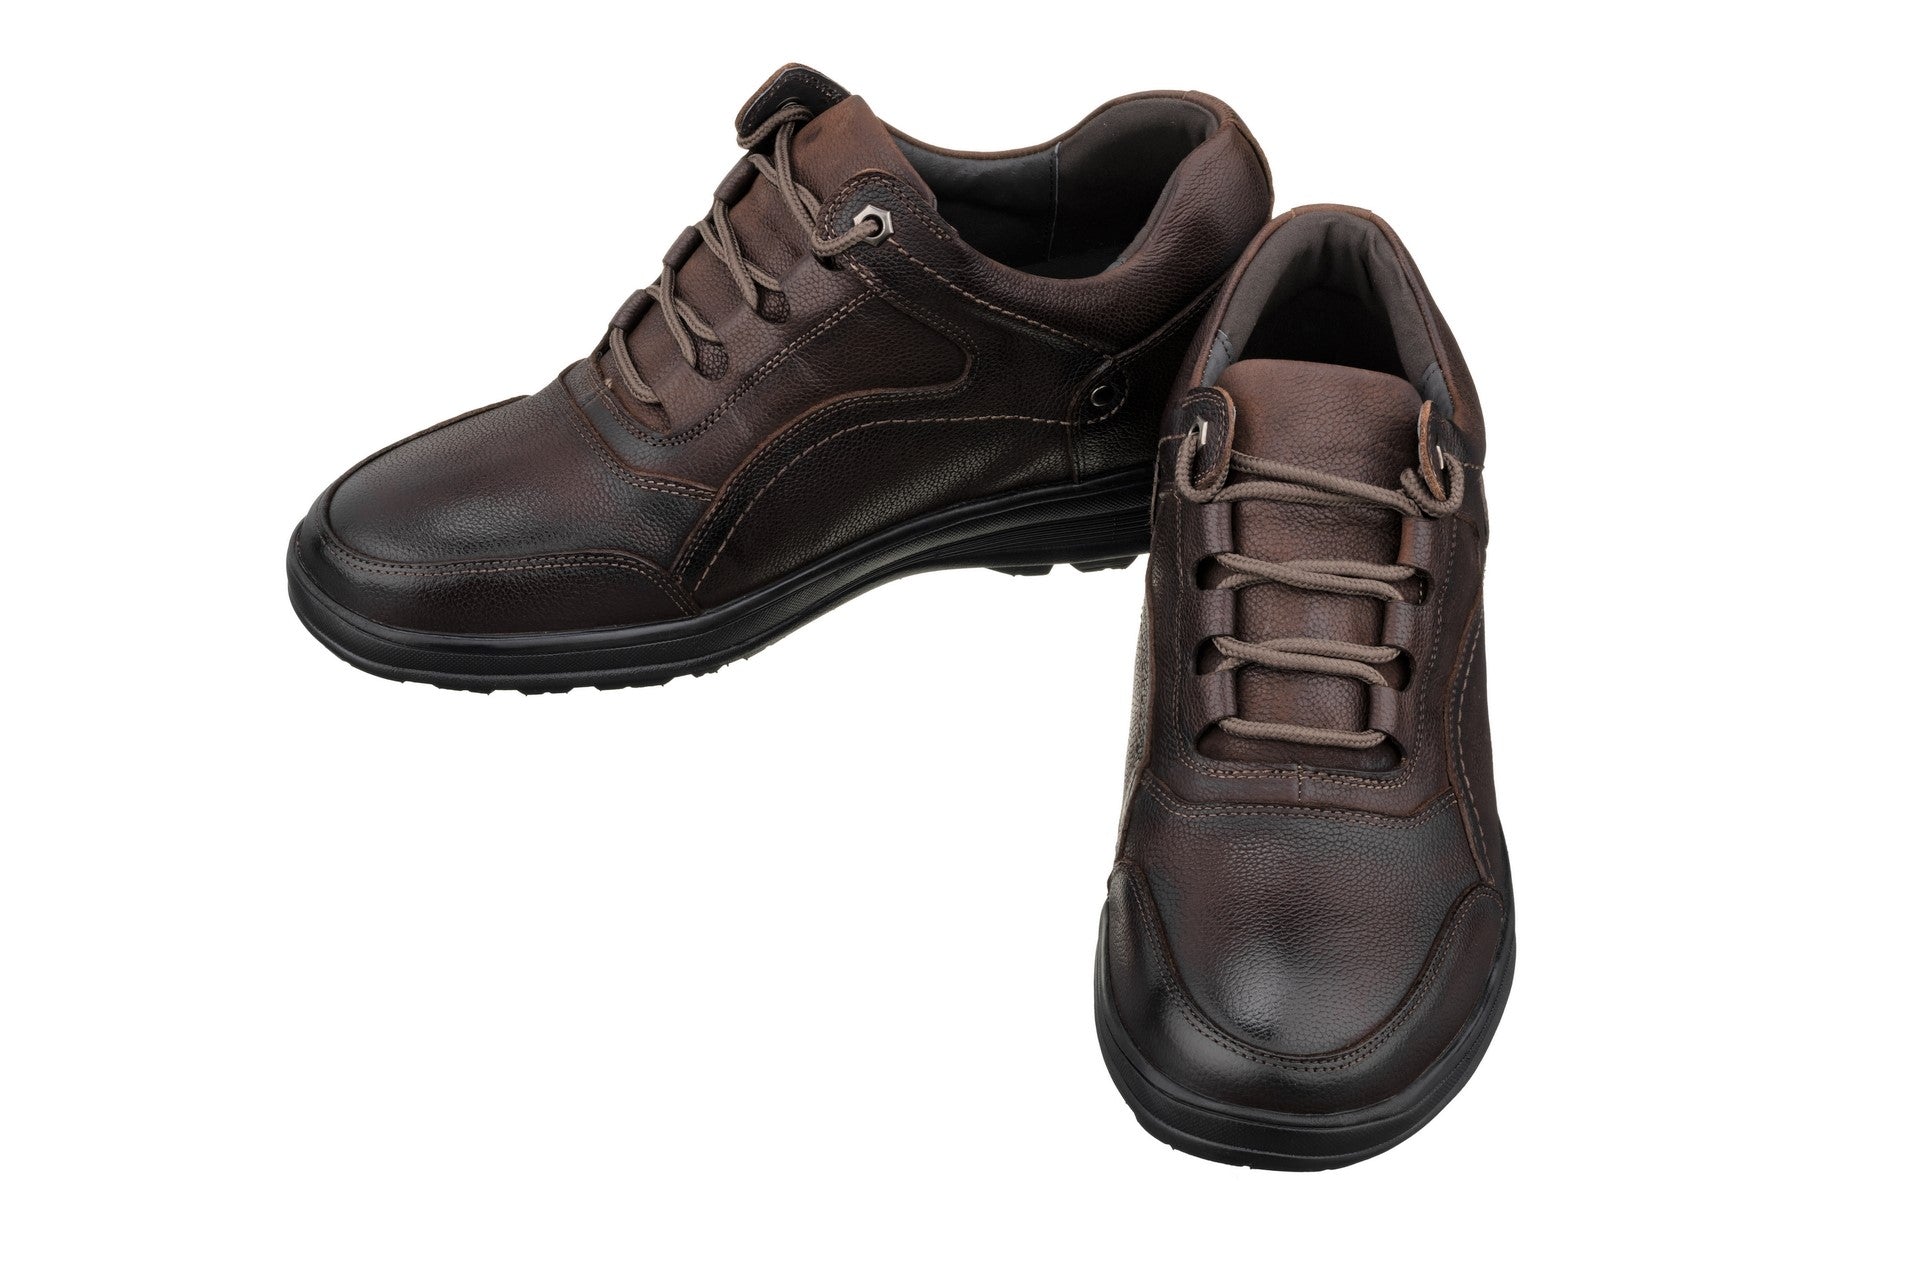 Elevator shoes height increase CALTO - K3045 - 2.8 Inches Taller (Dark Brown) - Lace Up Casual Walker - Lightweight